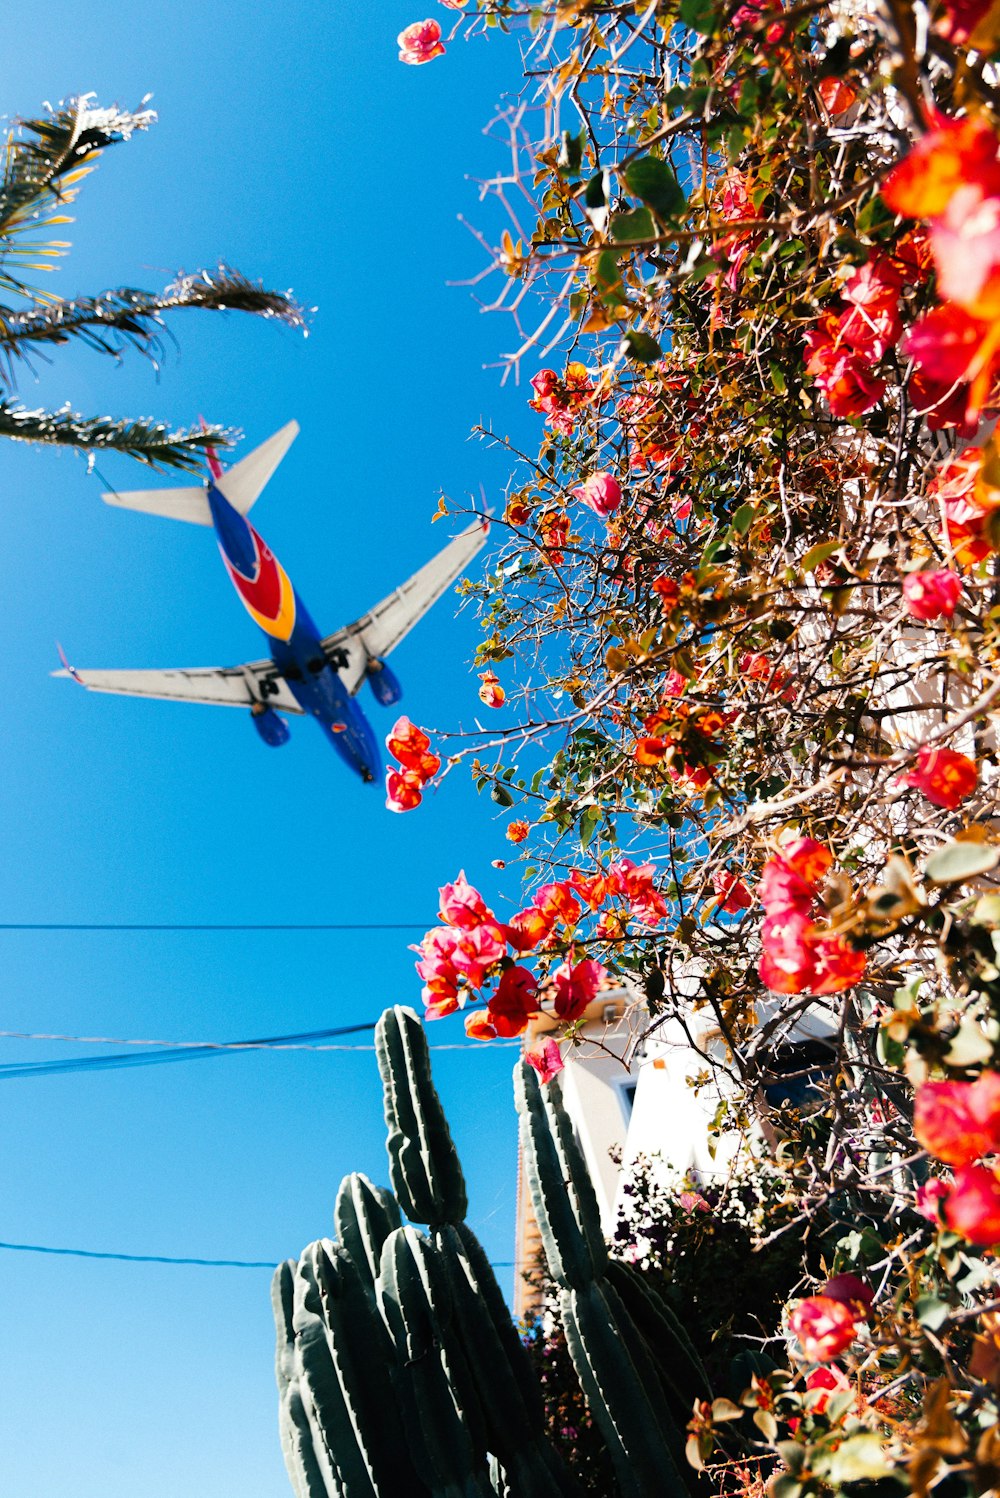 an airplane is flying over a cactus and flowers